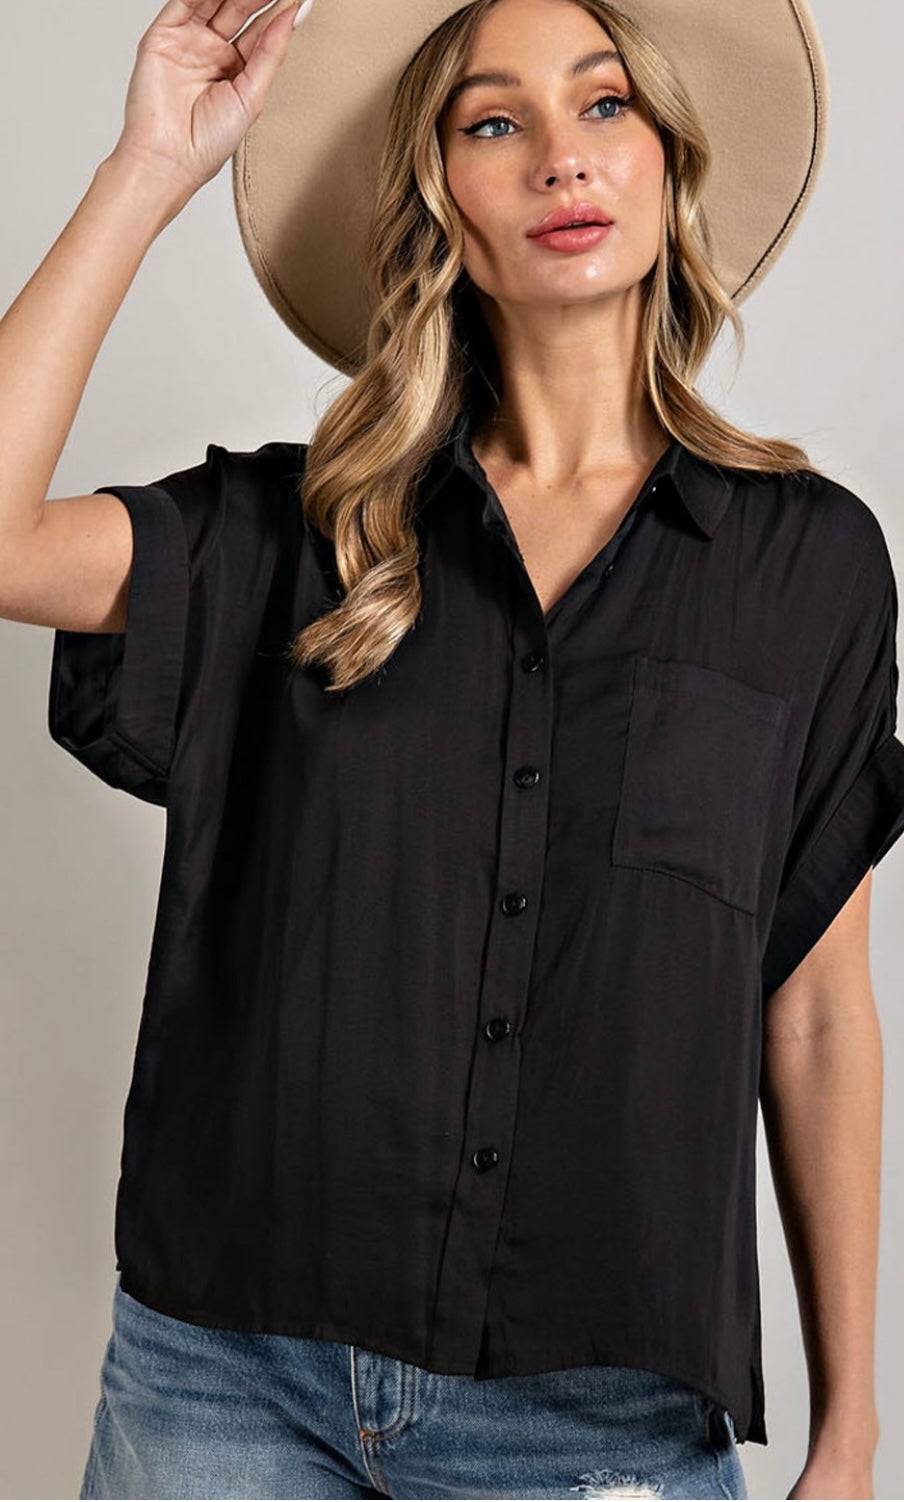 Eesome Black Button Up Short Sleeve Top